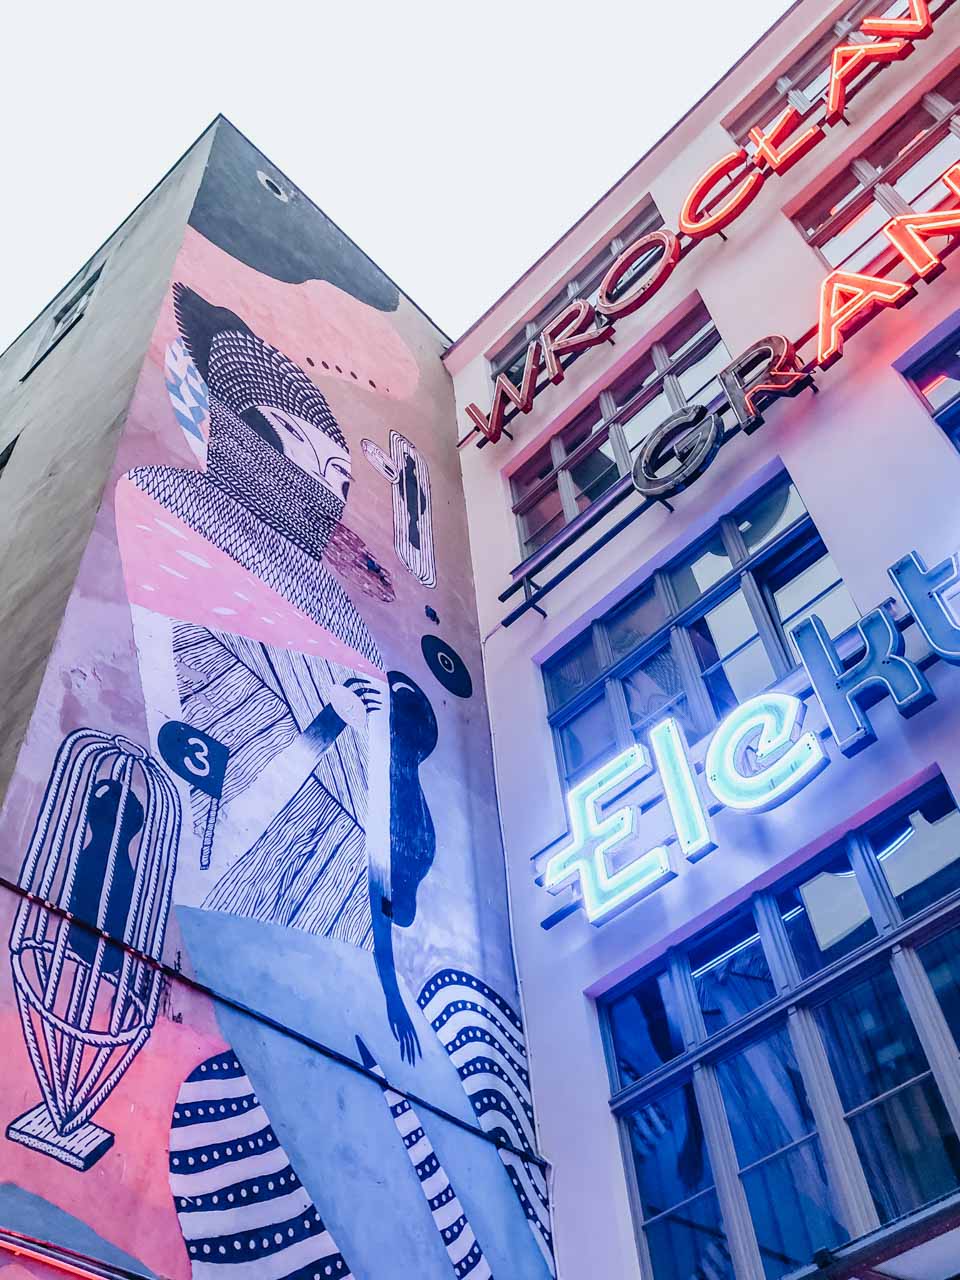 A mural and neon signs at the Neon Side Gallery in Wrocław